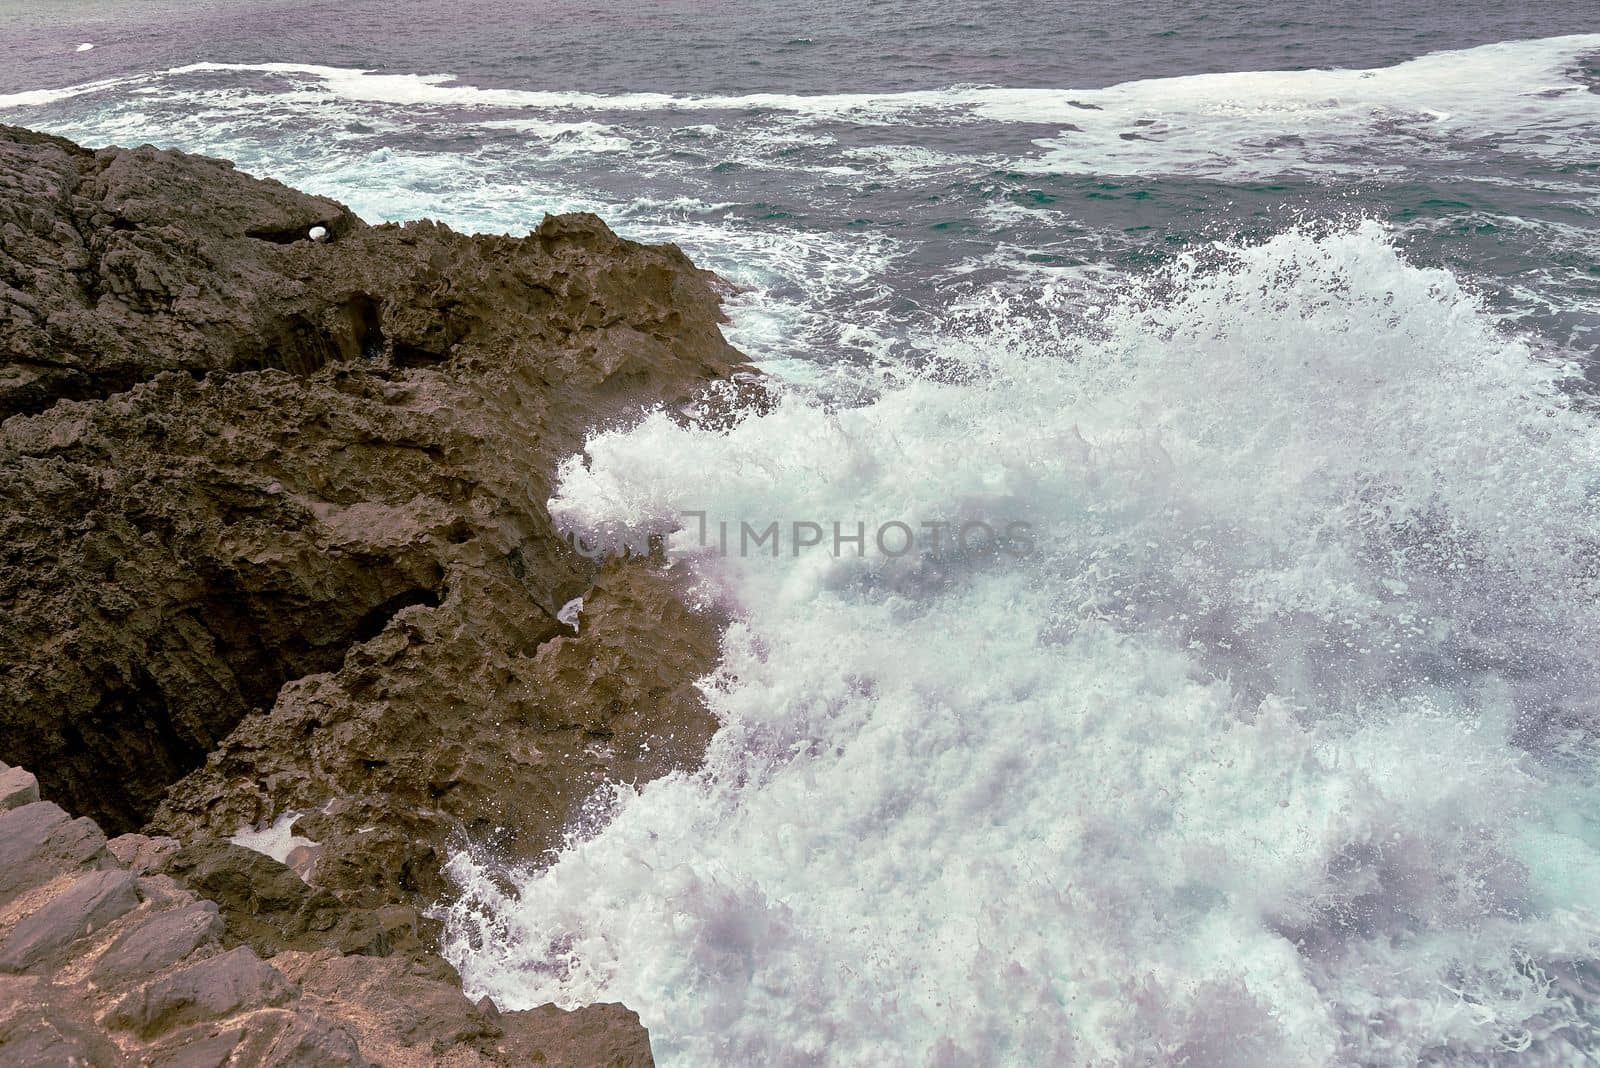 Waves breaking on the rocks at the shore of the beach by raul_ruiz